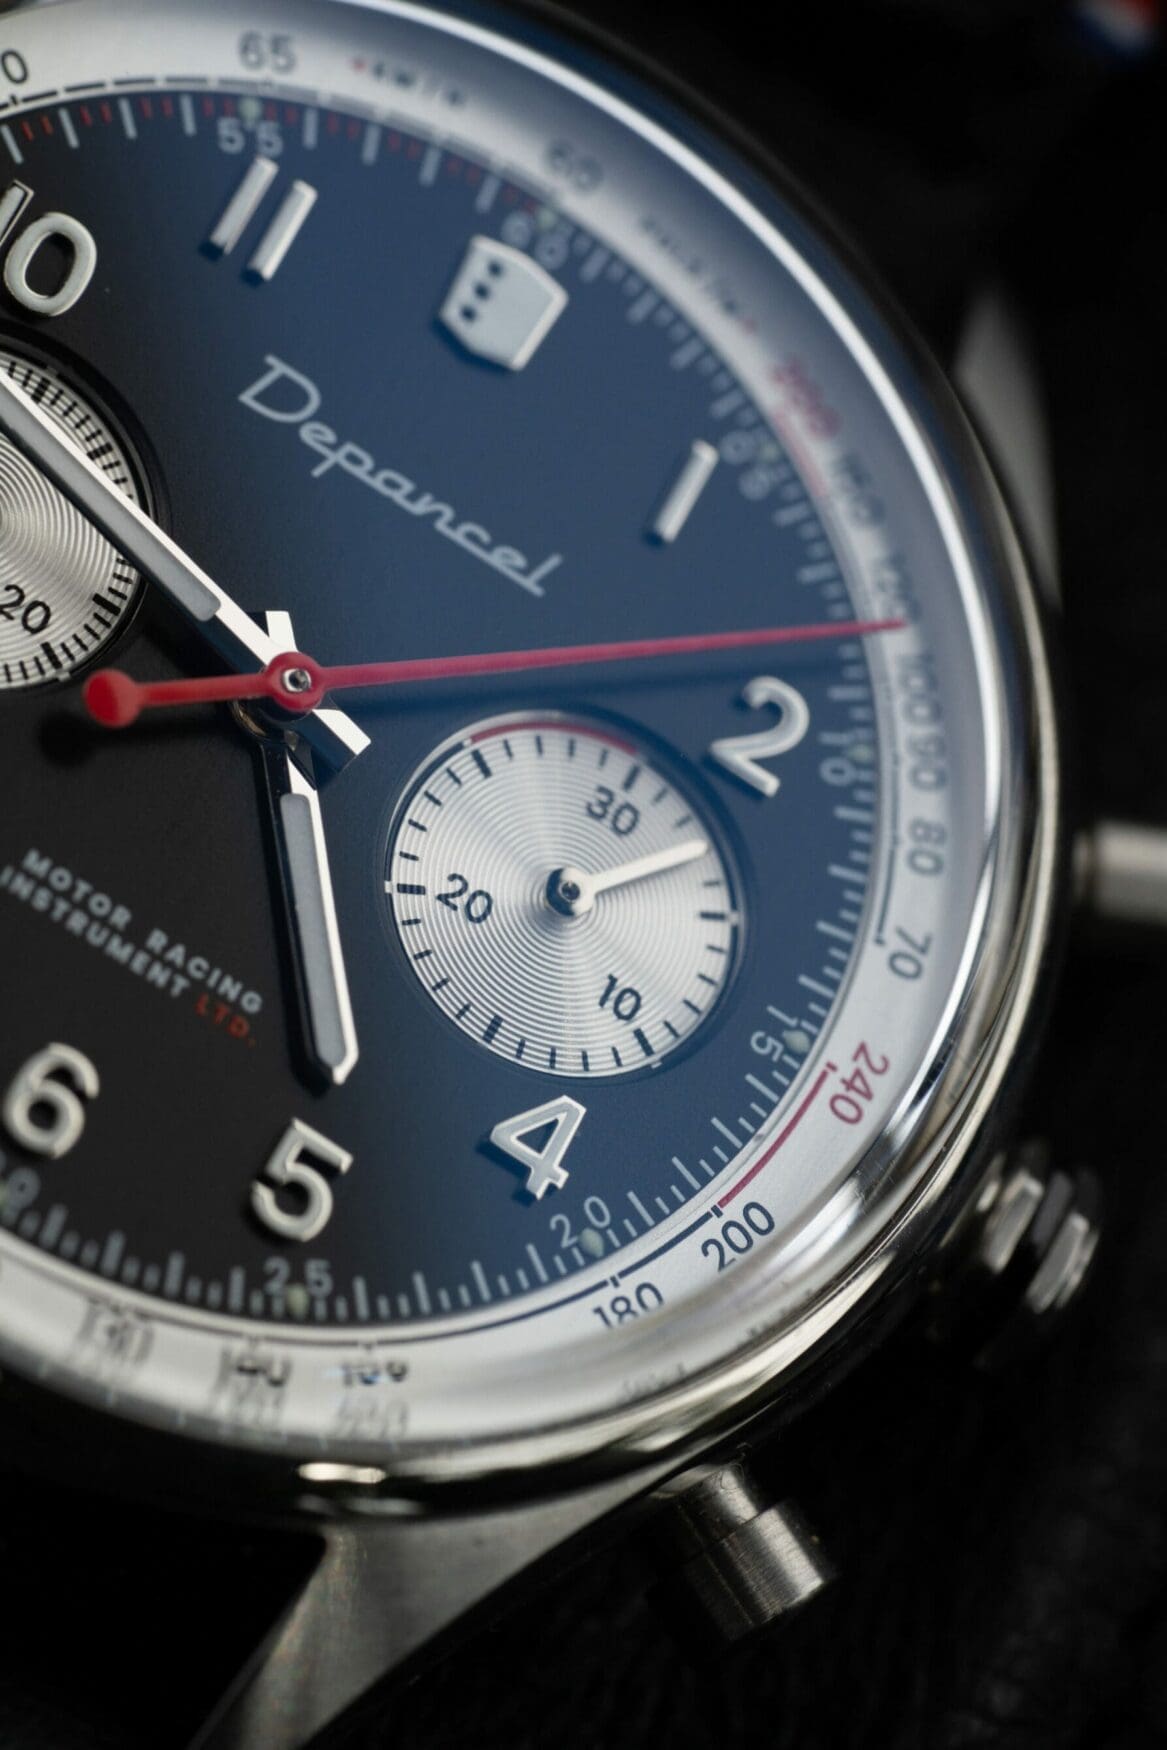 The Depancel Legend 60s is a twin-register throwback with bags of style